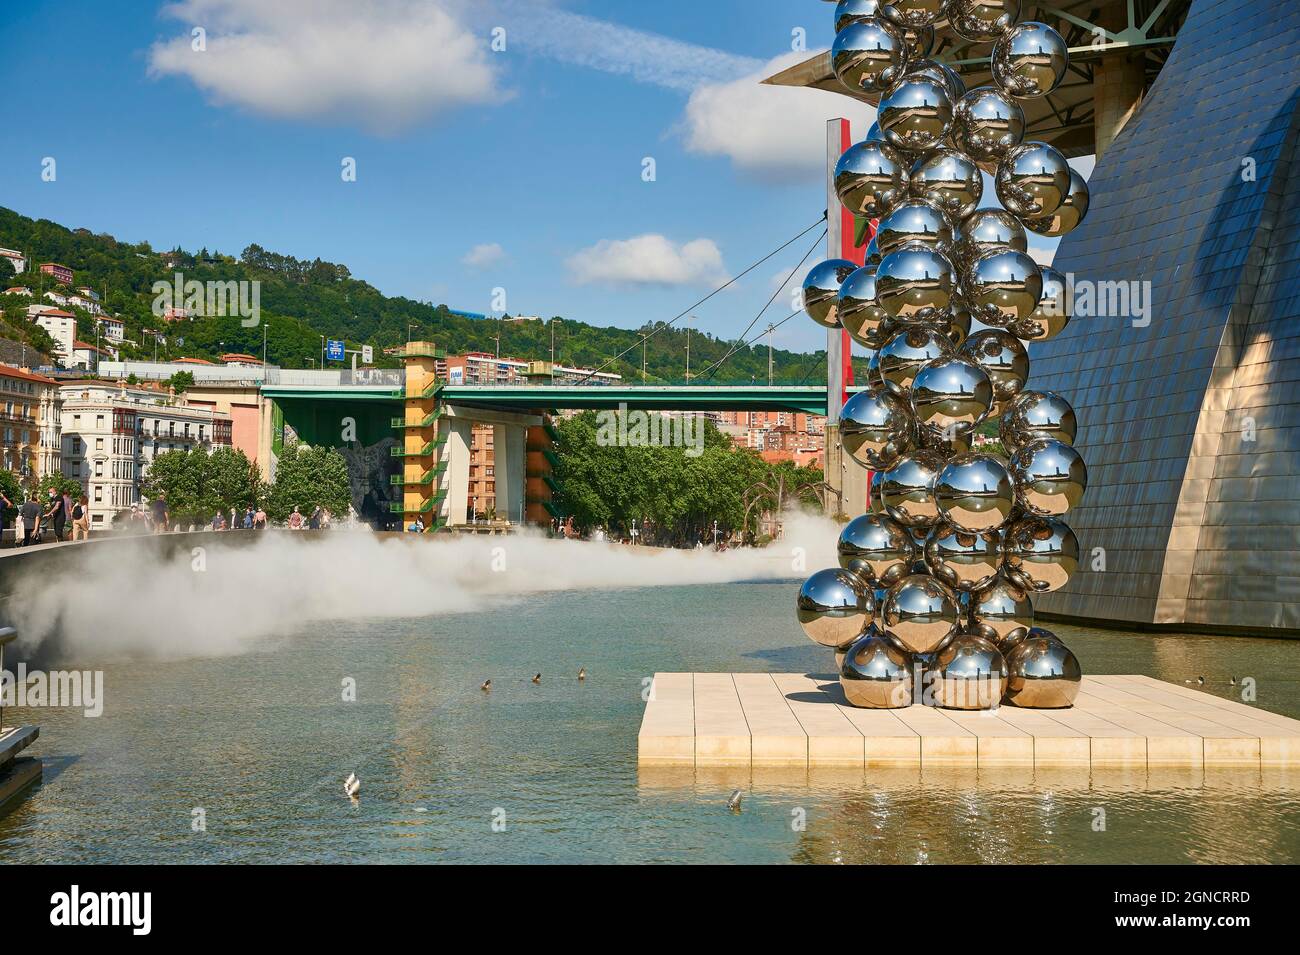 Guggenheim Museum and the sculpture “Tall tree and the eye” by Anish Kapoor with “La Salve” bridge on the background, Bilbao, Vizcaya, Basque Country, Stock Photo